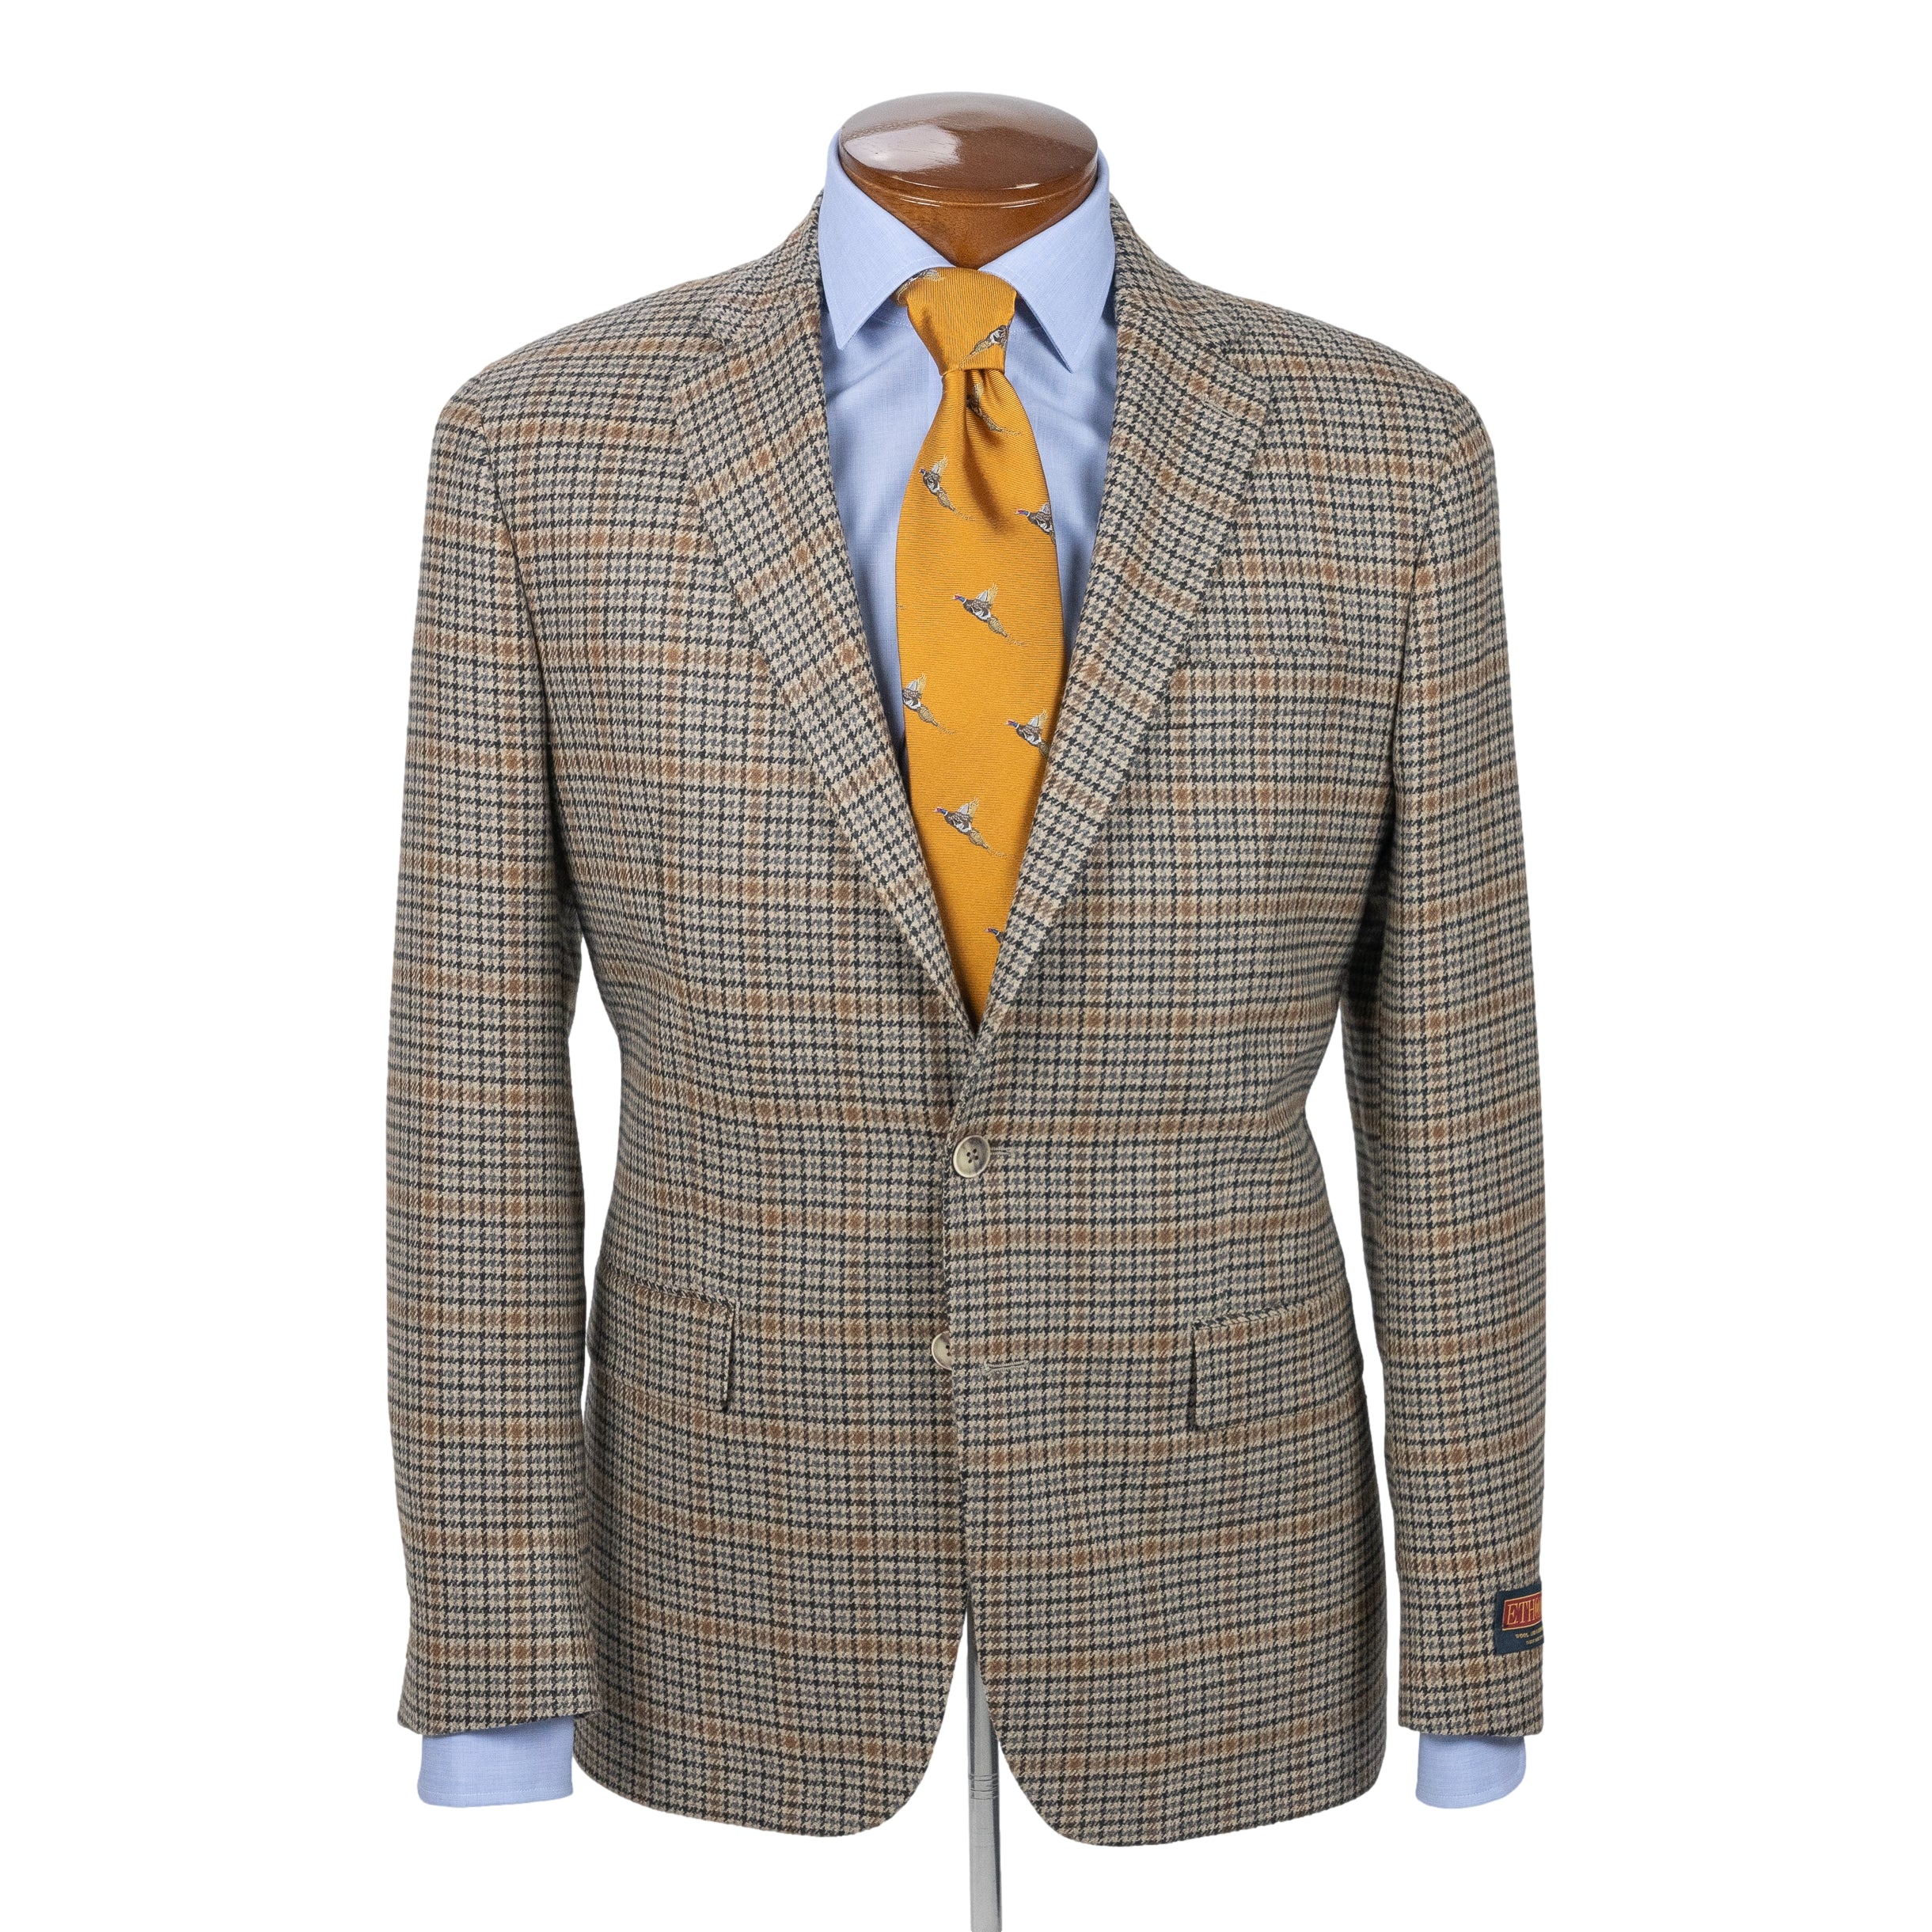 Tan and Grey Wool and Cashmere Houndstooth Sport Coat